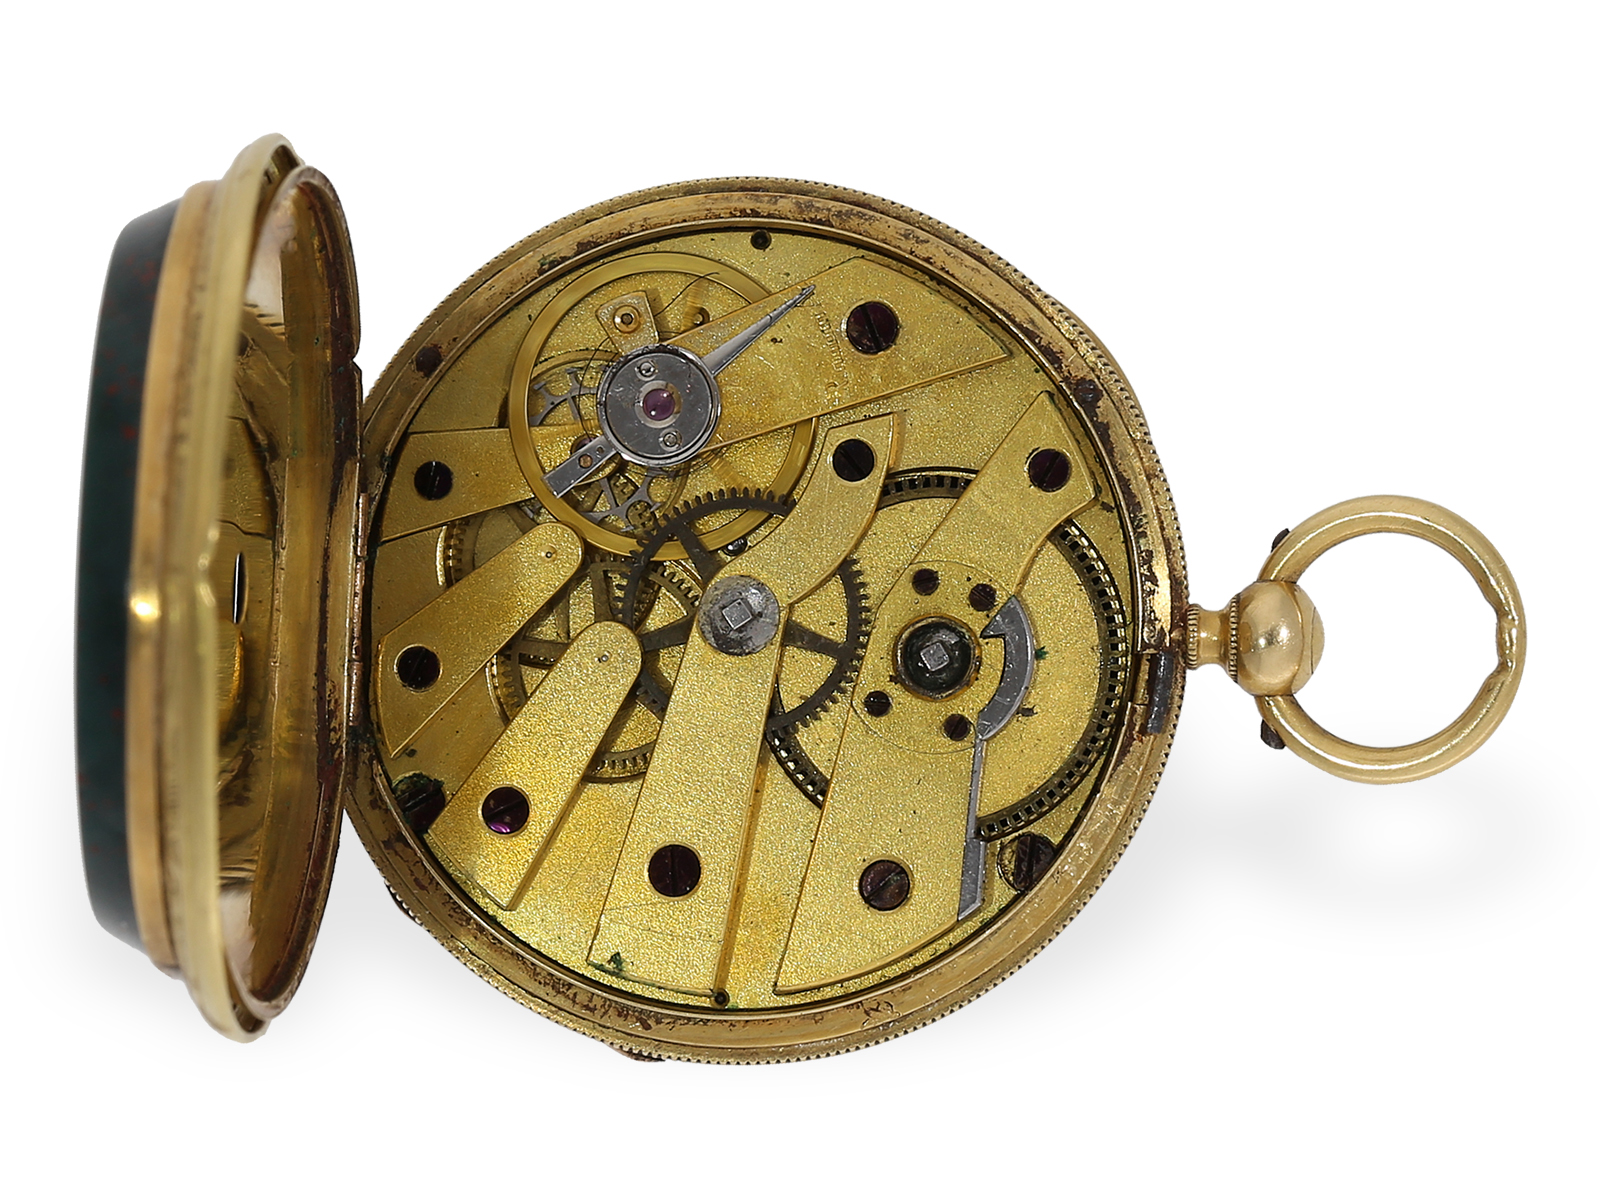 Pocket watch: rare lepine with gold/jasper case and gold/jasper chatelaine, ca. 1850 - Image 5 of 8